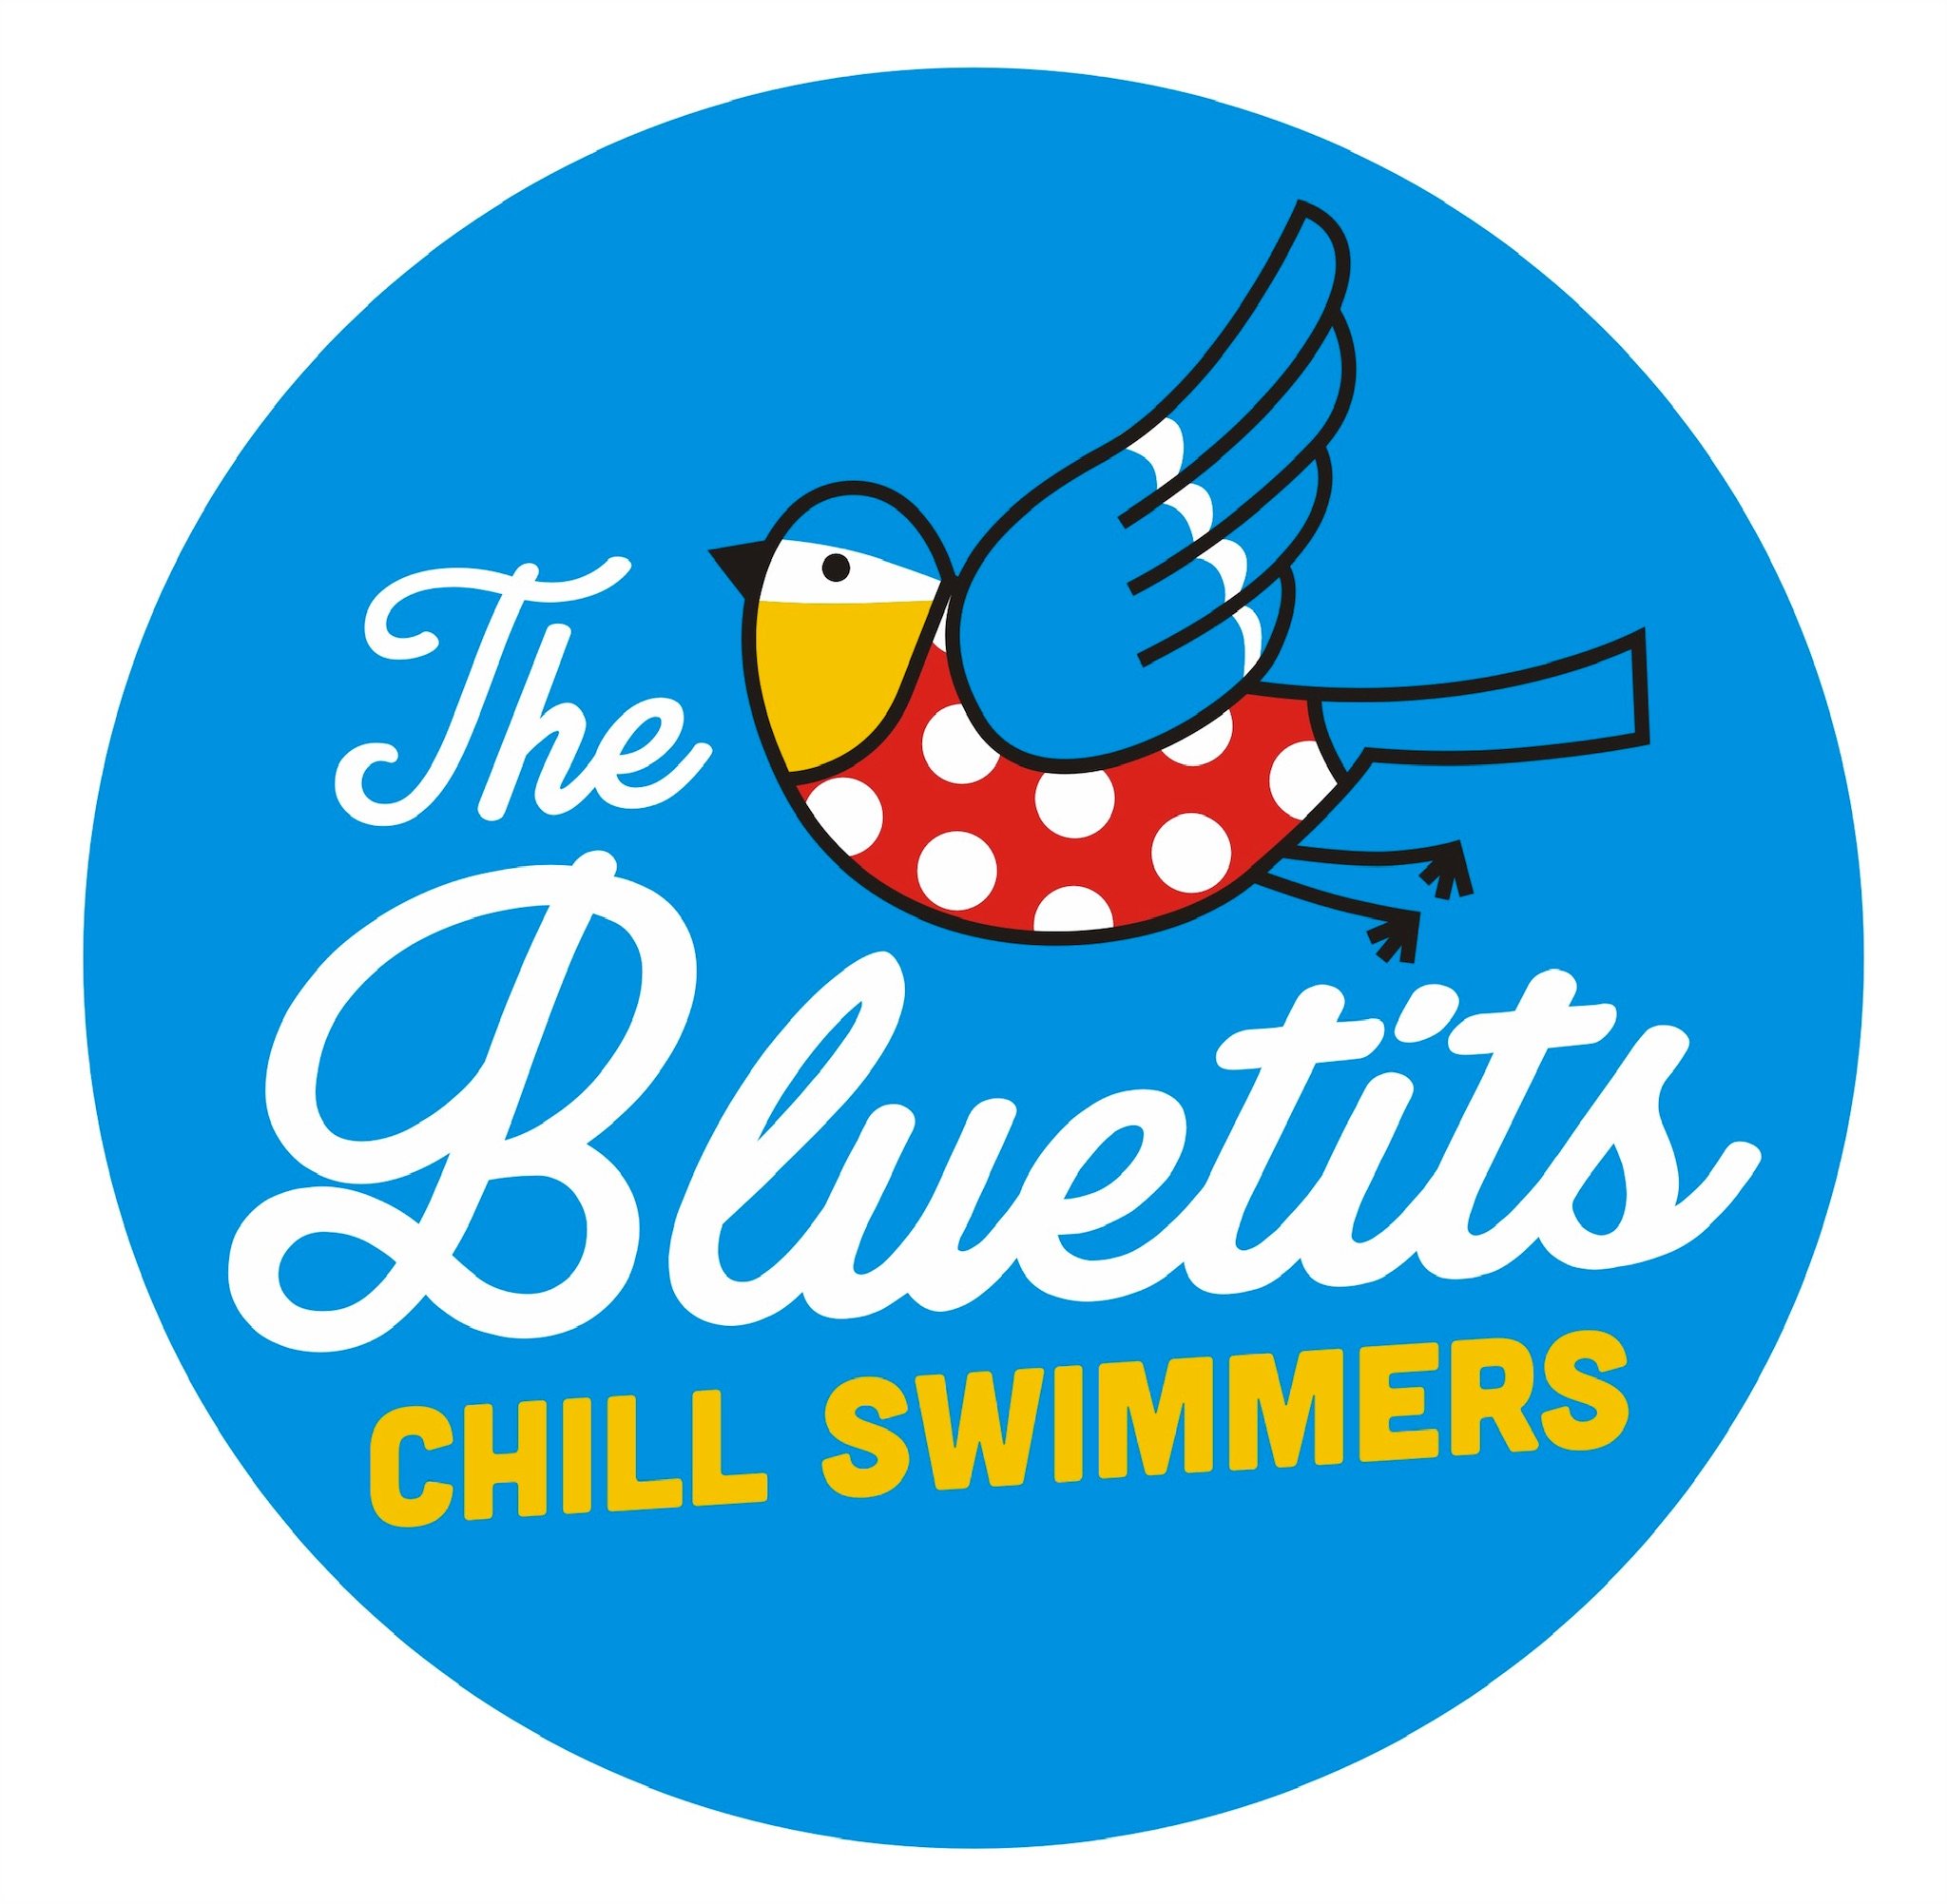 The Bluetits are a year round chill swimming group with an emphasis on experiencing the thrill of skin swimming. Visit our website to join your local flock!